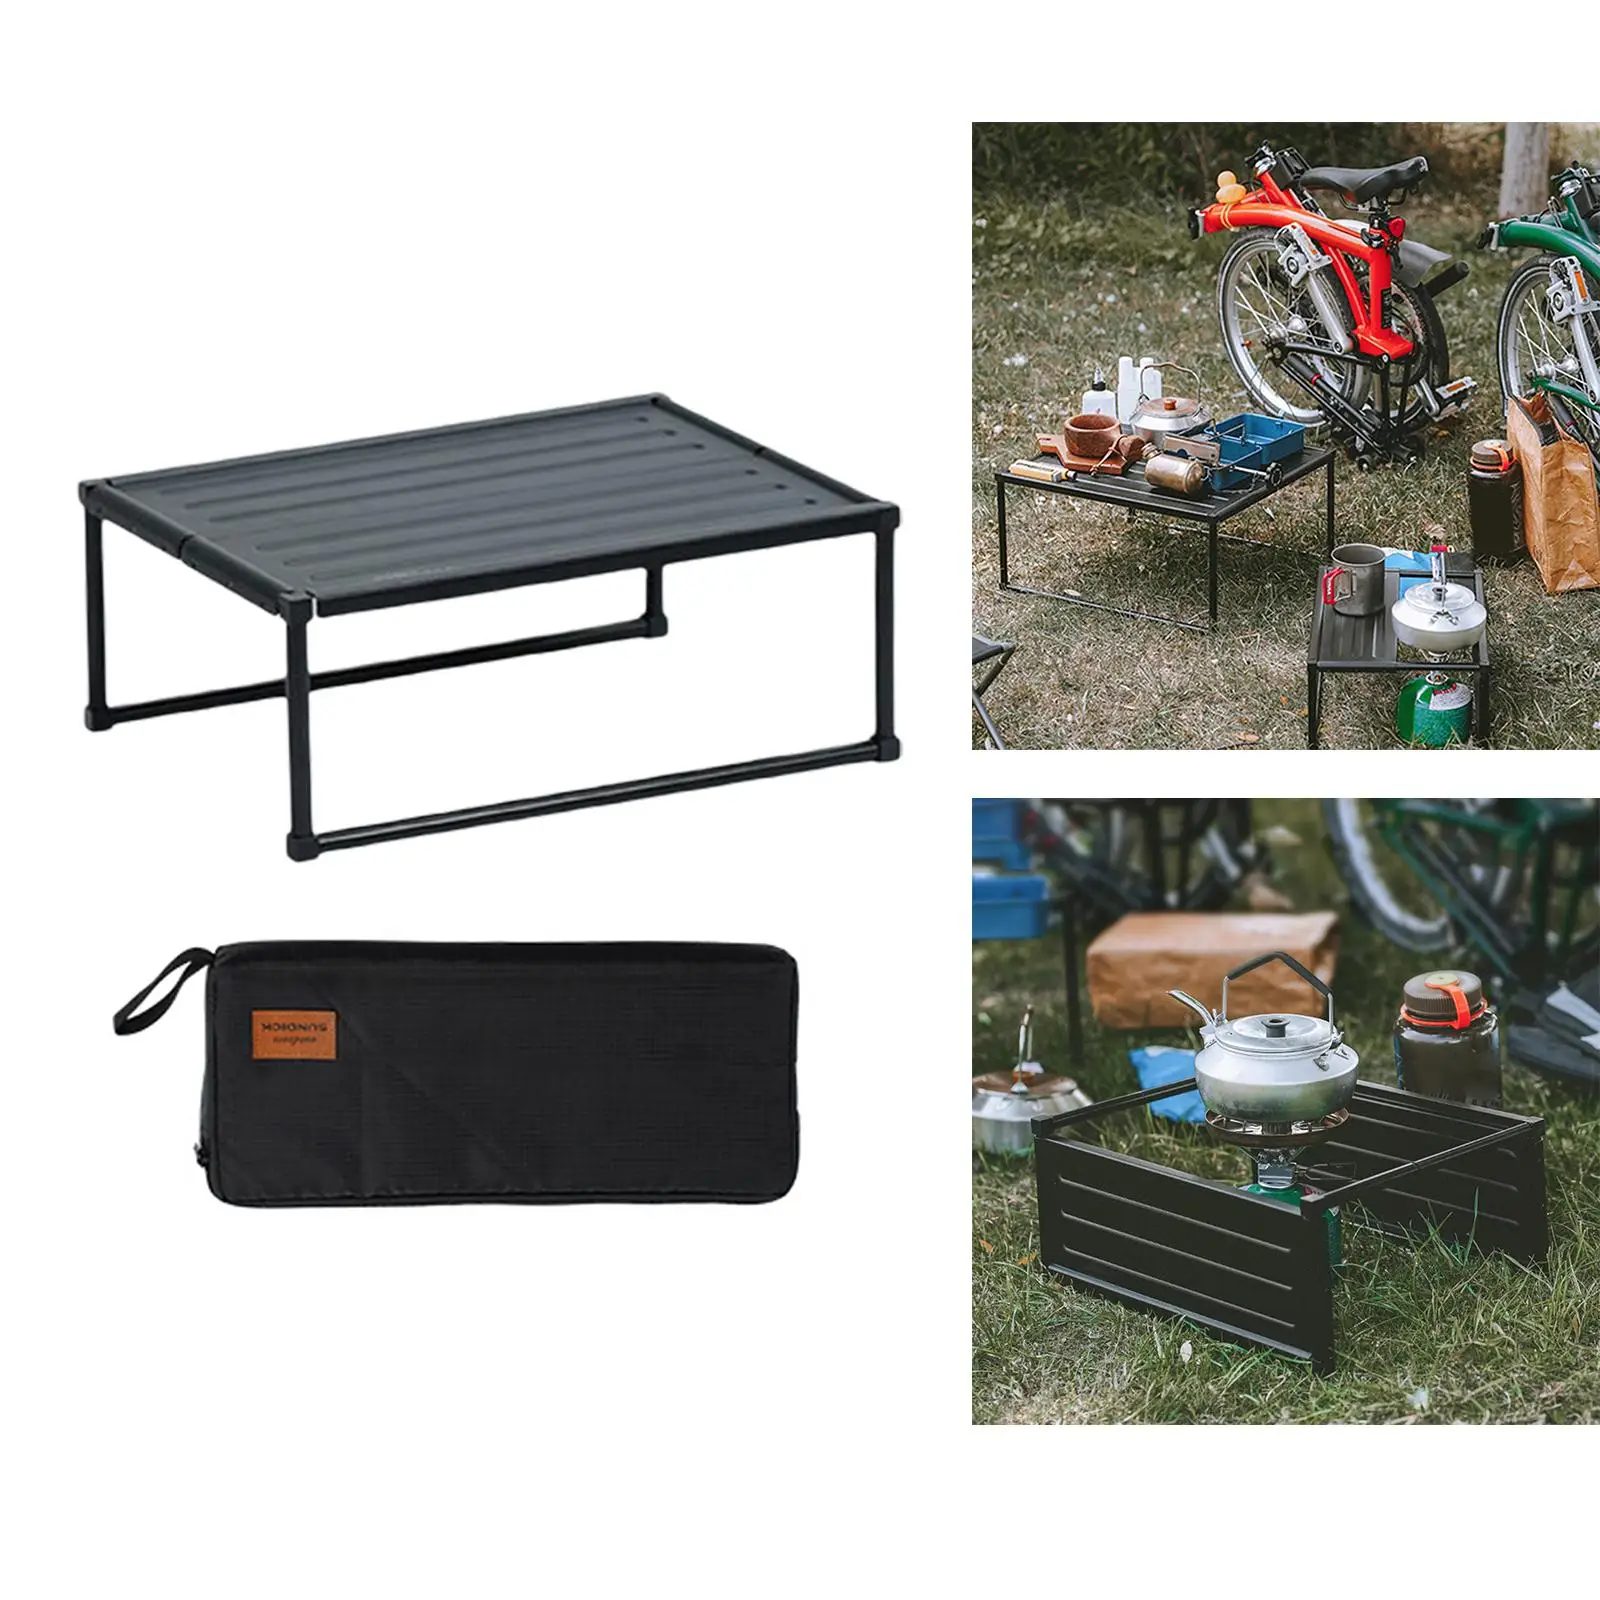 

Folding Table Travel Camping Table Outdoor Indoor Picnic BBQ Hiking Table for Patio, Garden, Backyard, Beach, BBQ